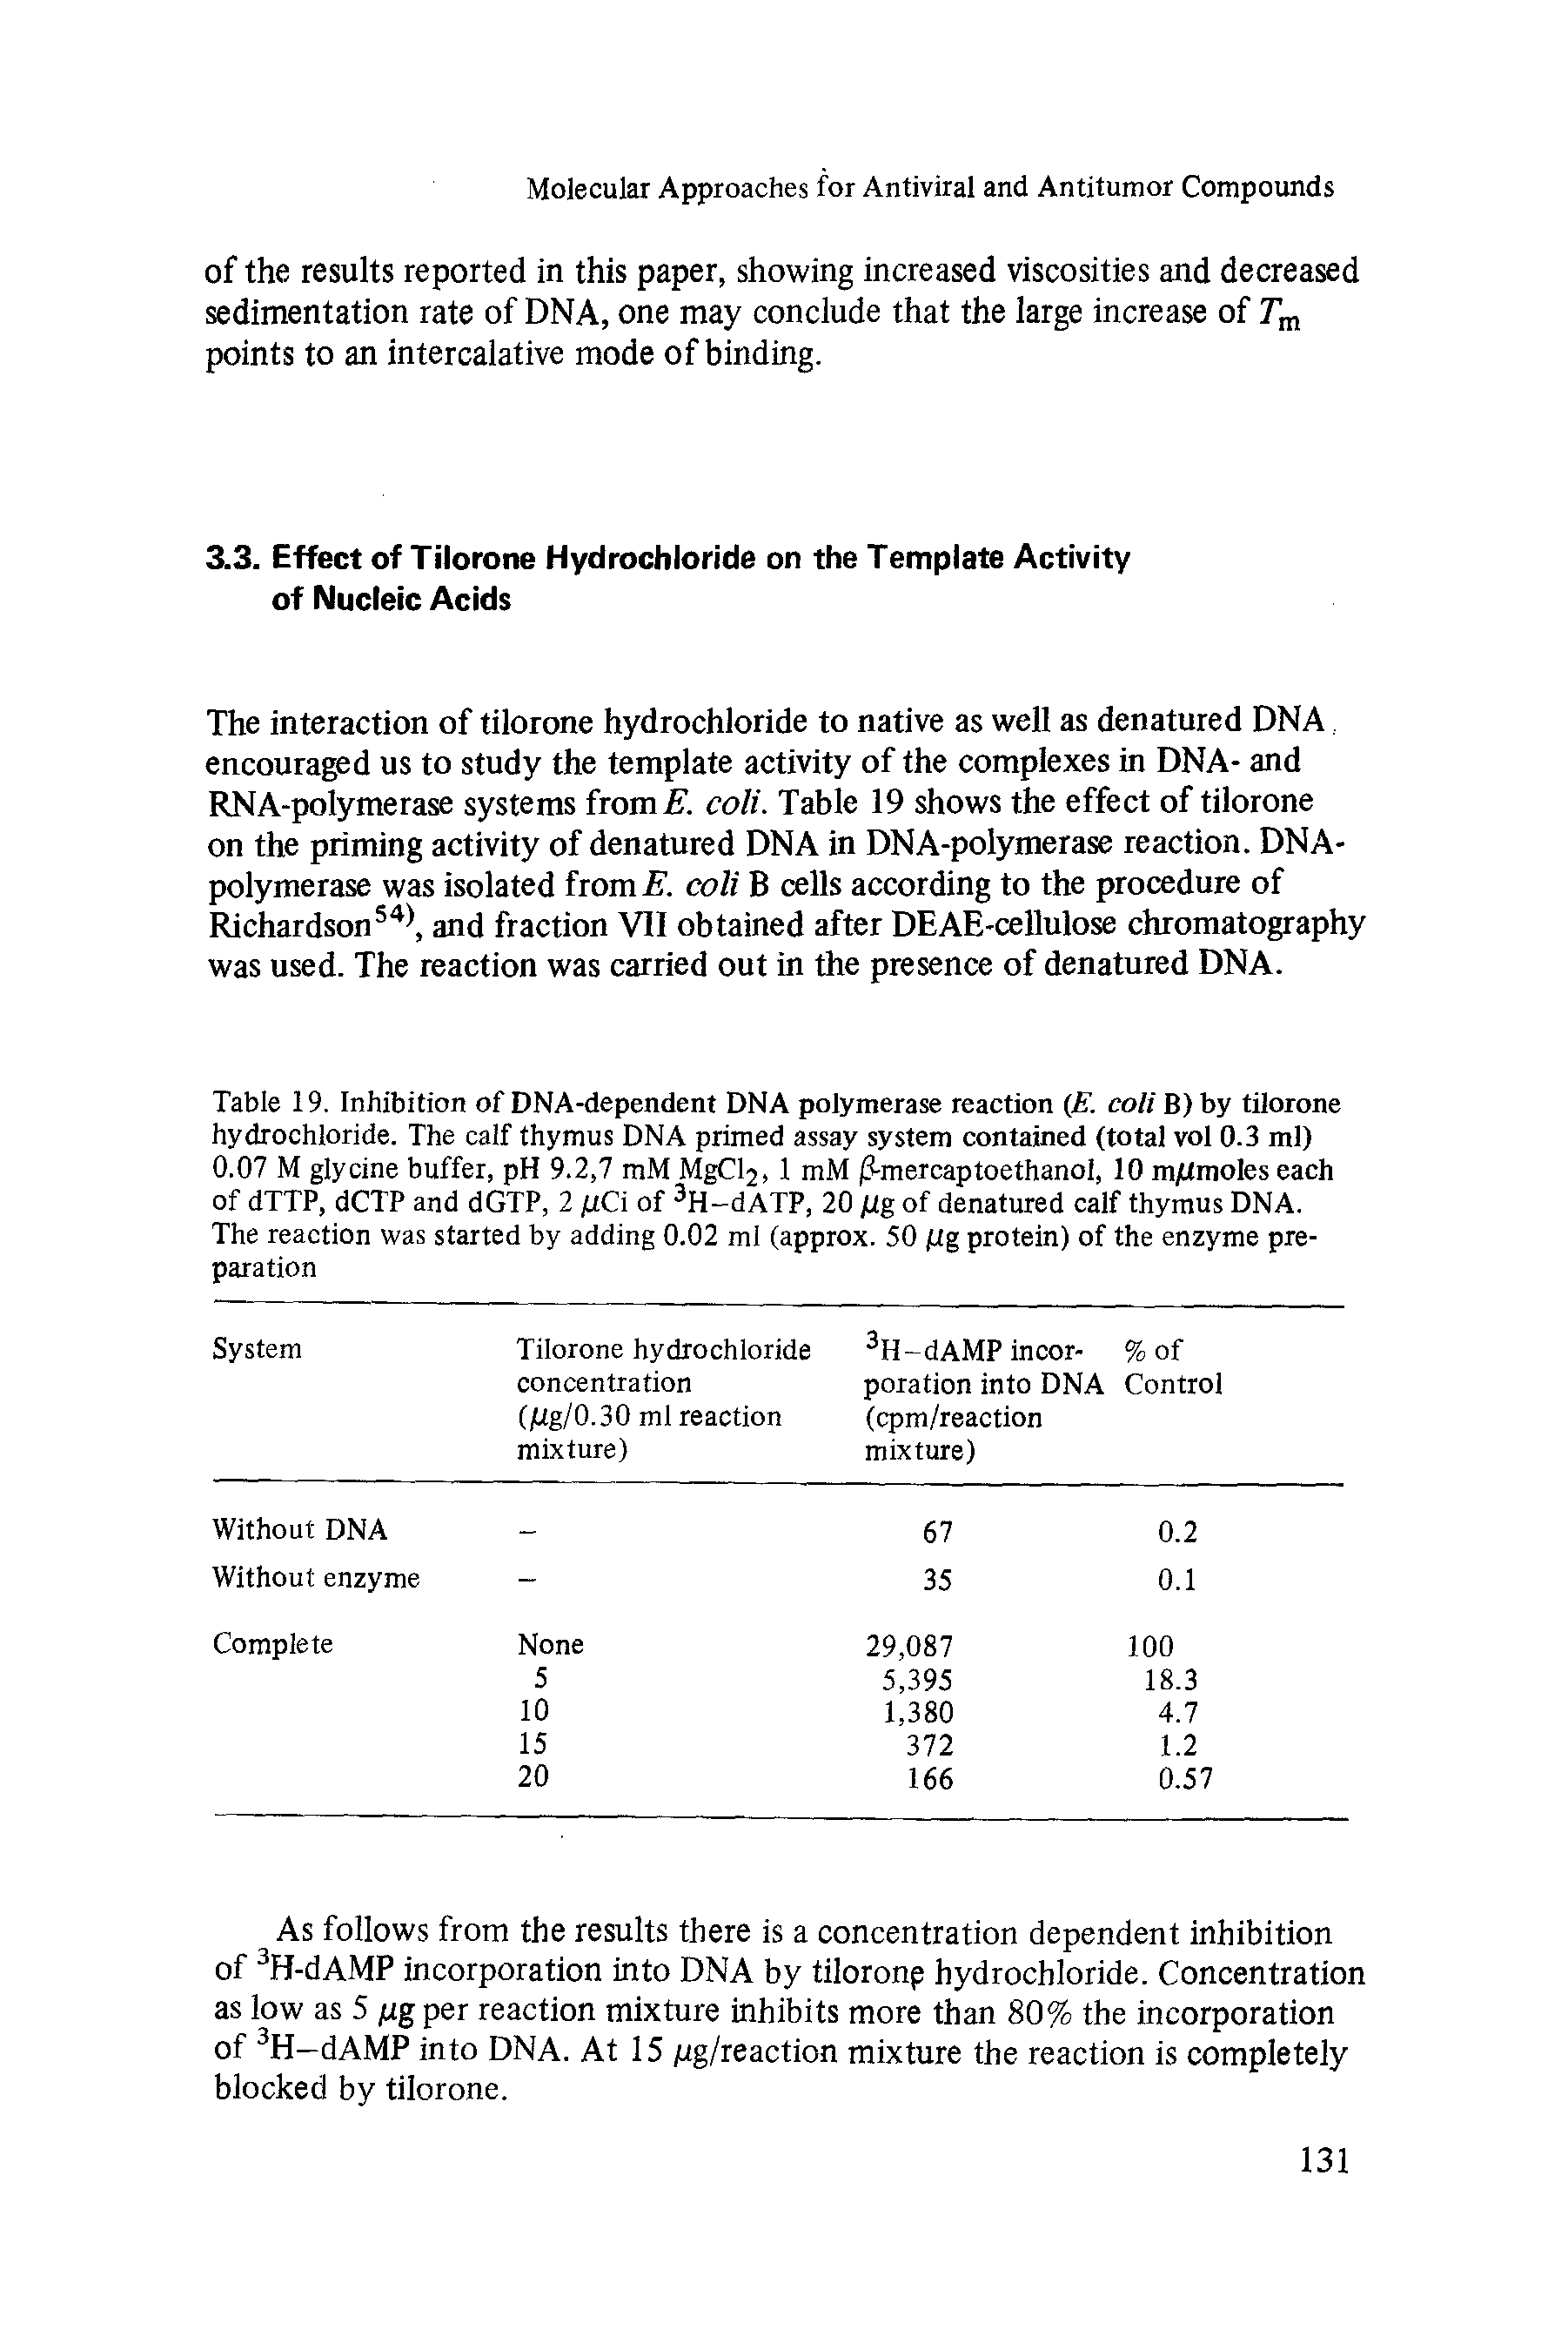 Table 19. Inhibition of DNA-dependent DNA polymerase reaction (E. coli B)by tilorone hydrochloride. The calf thymus DNA primed assay system contained (total vol 0.3 ml) 0.07 M glycine buffer, pH 9.2,7 mM MgClj, 1 mM (3-mercaptoethanol, 10 m/Umoles each of dTTP, dCTP and dGTP, 2 flCi of 3H-dATP, 20 jig of denatured calf thymus DNA. The reaction was started by adding 0.02 ml (approx. 50 ftg protein) of the enzyme preparation...